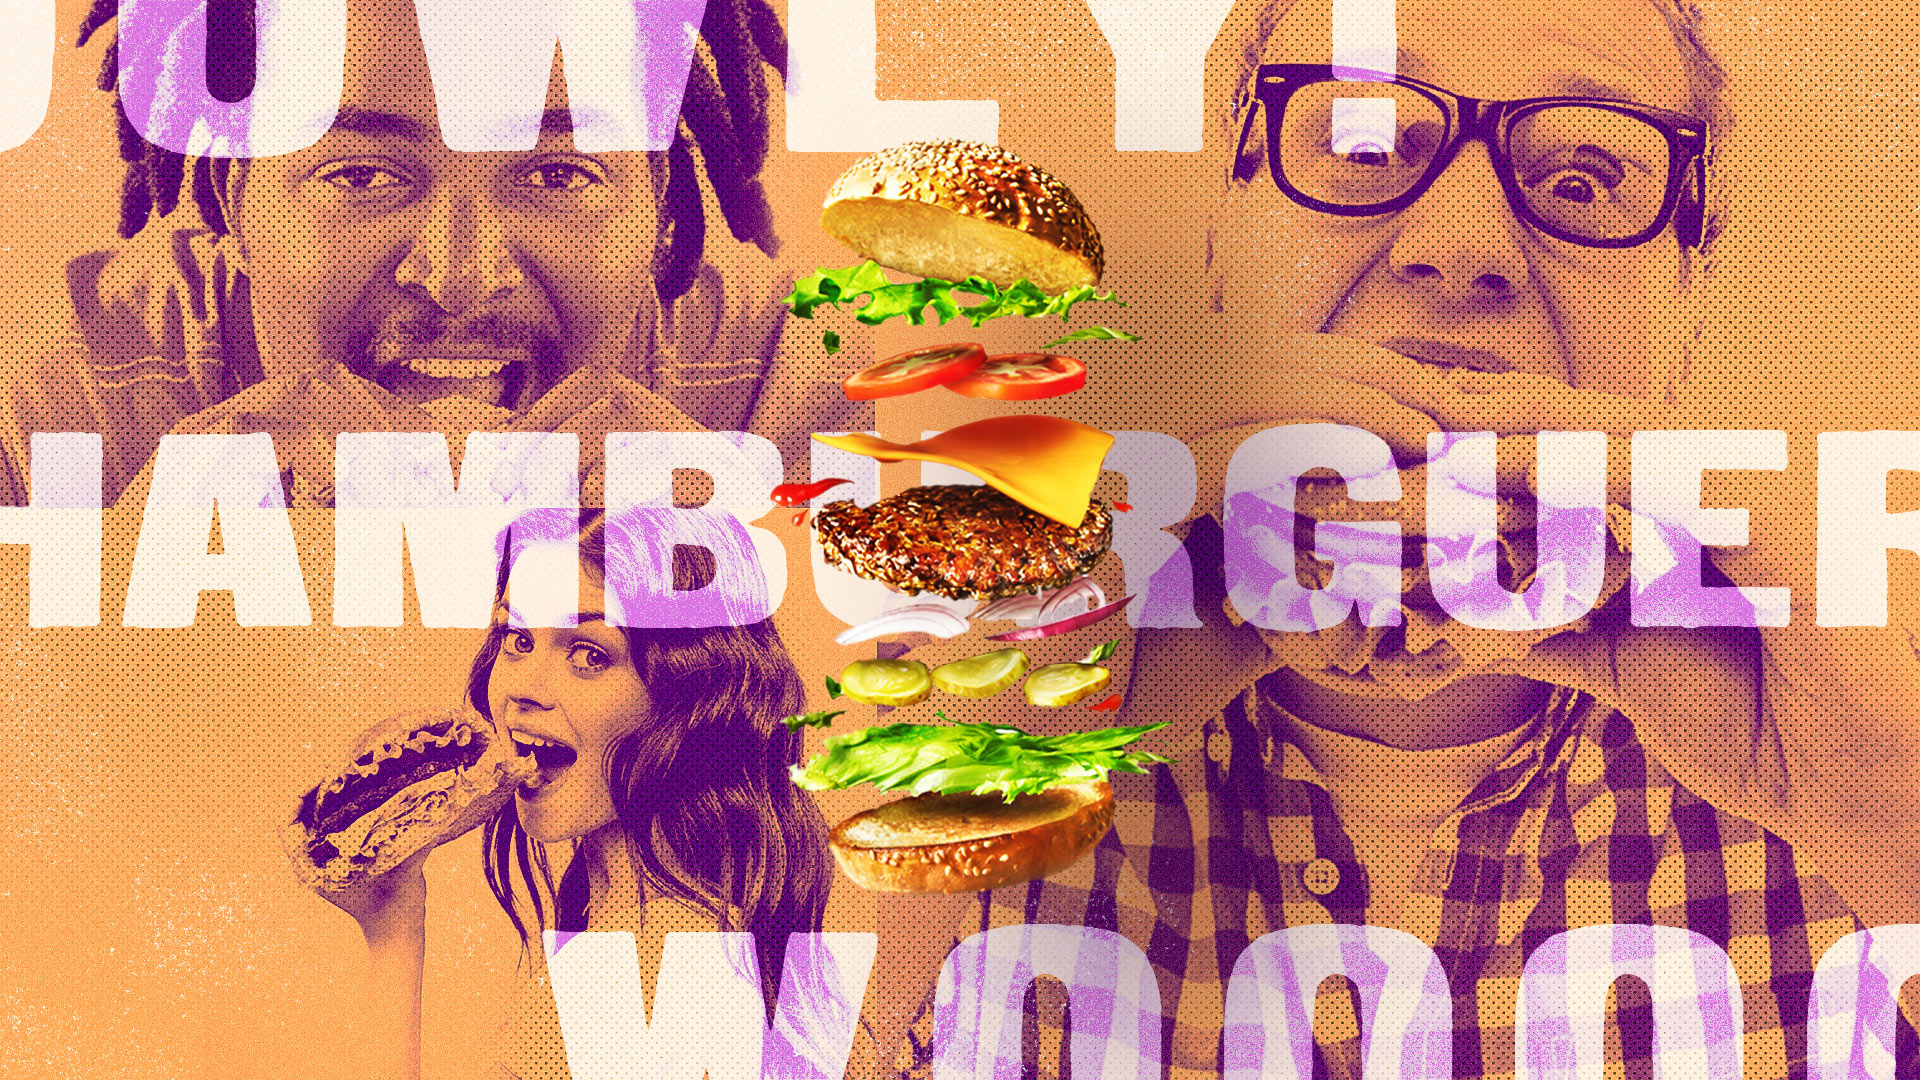 Visual Identity for Wowly Burger by Caio Costa